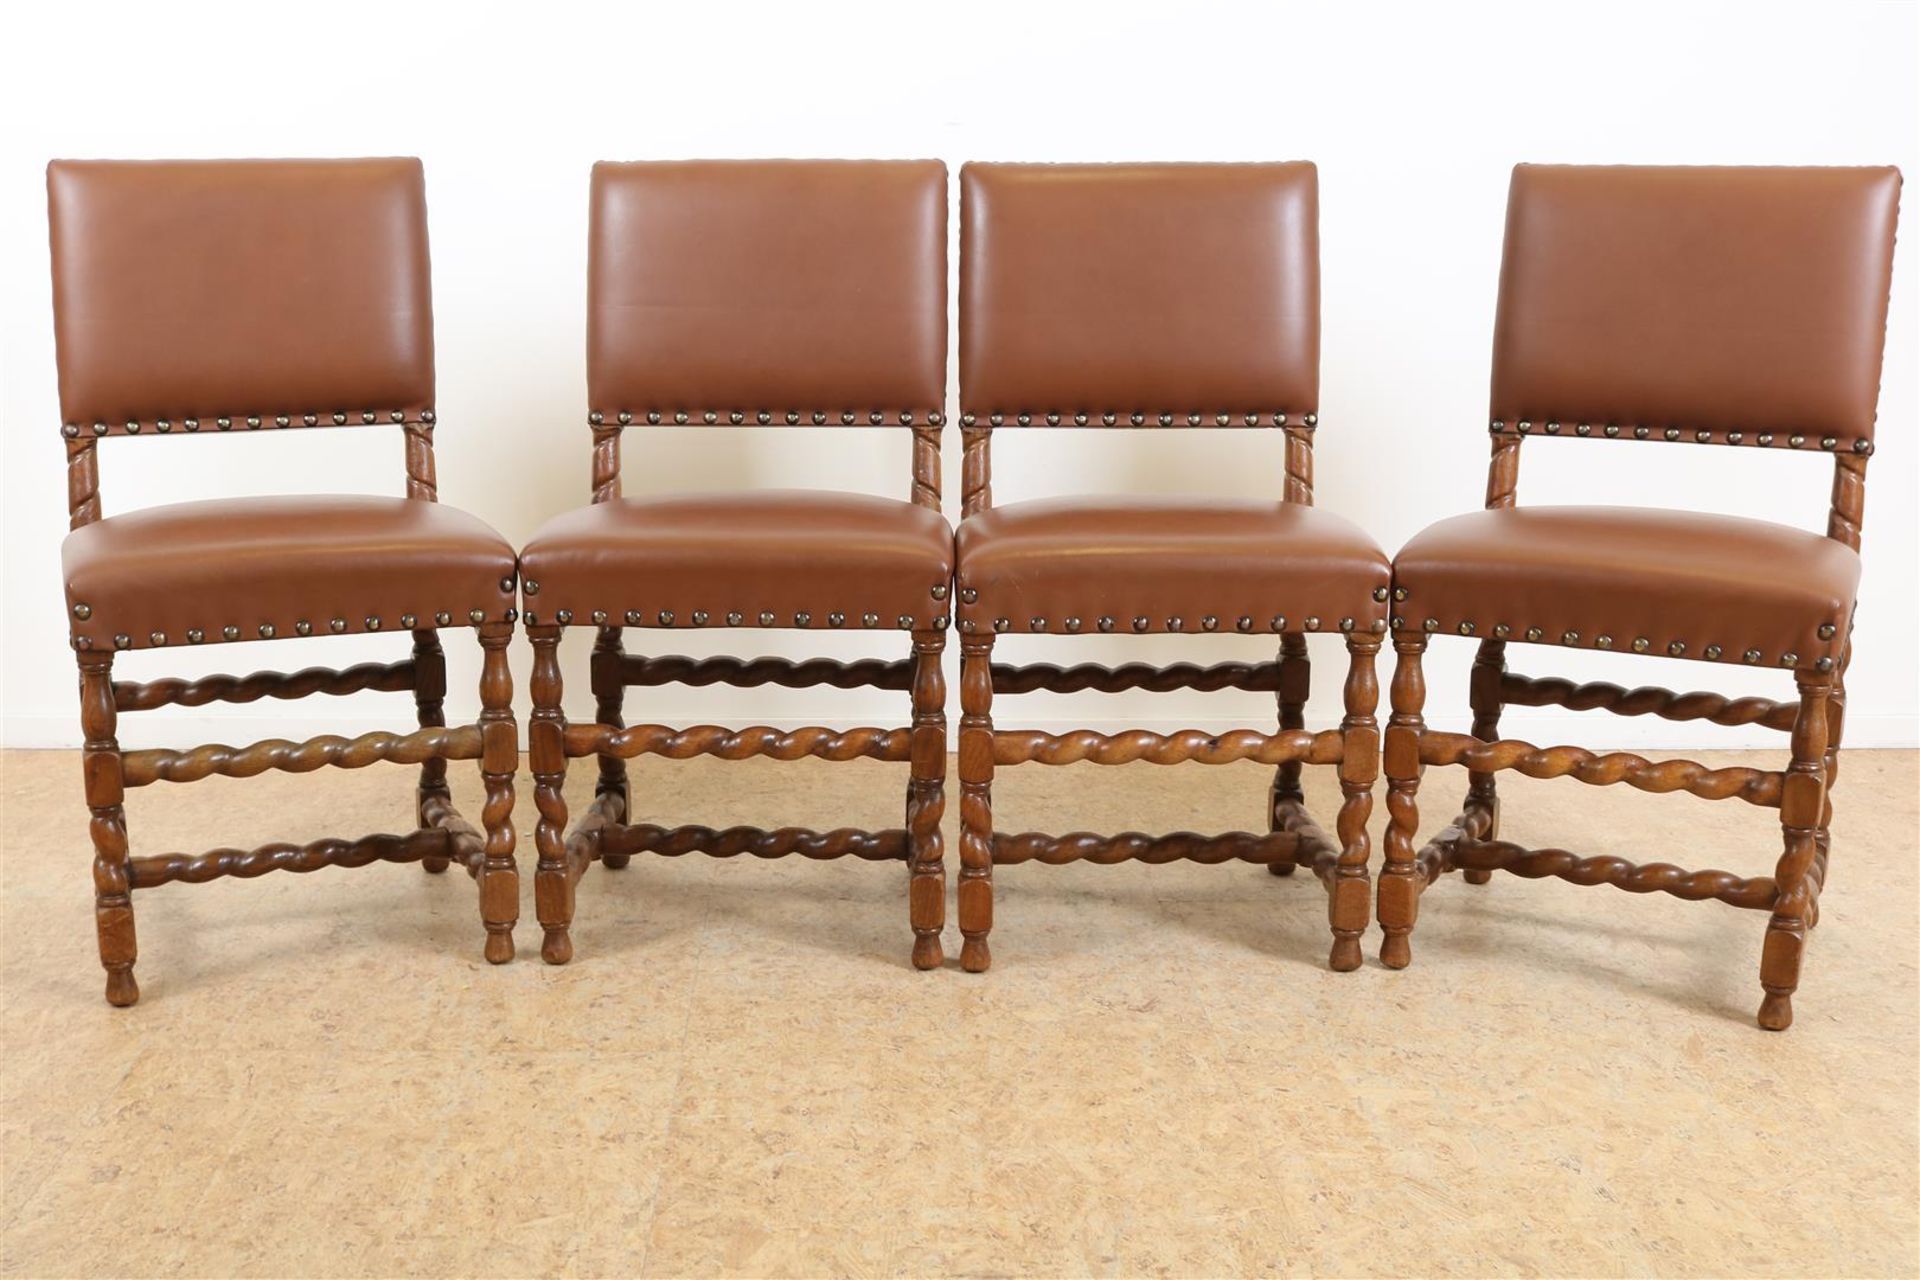 Series of 4 oak Renaissance-style chairs upholstered in brown leather.